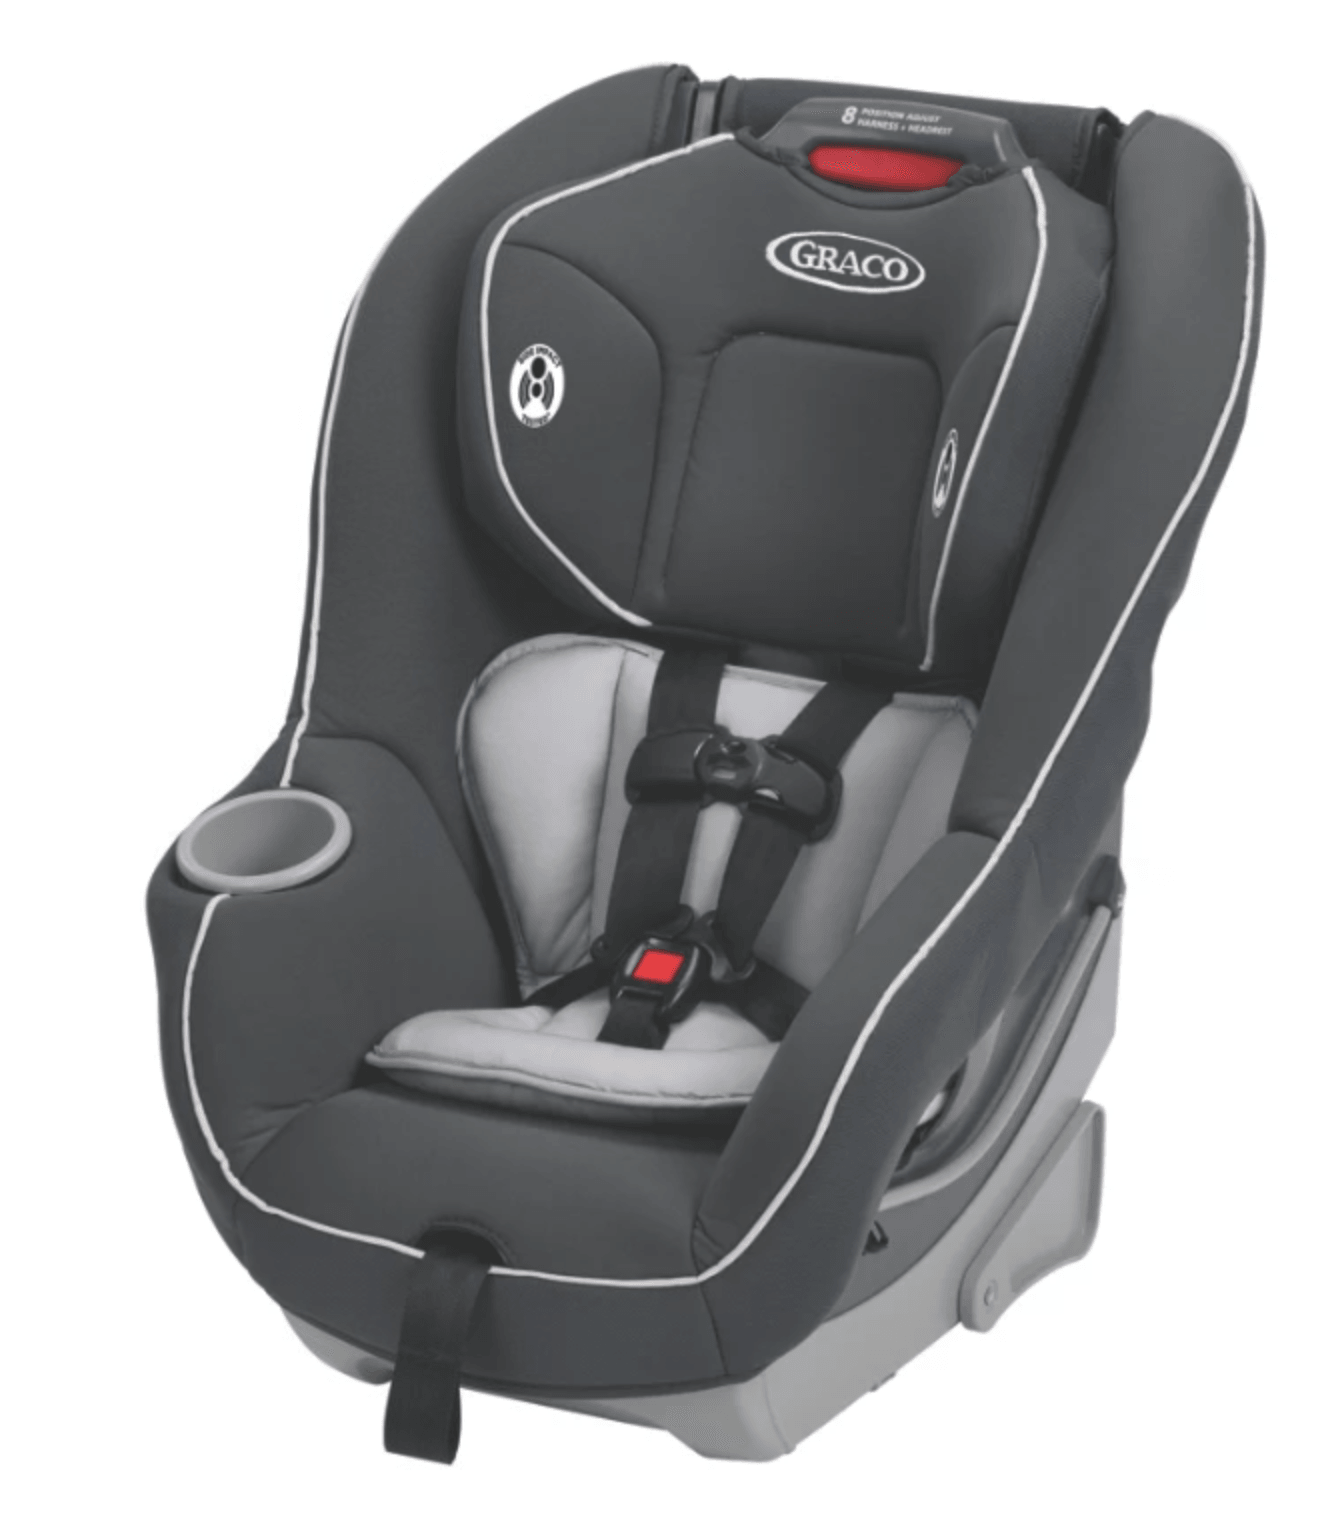 Contender™ 65 Convertible Car Seat - The Baby's Room